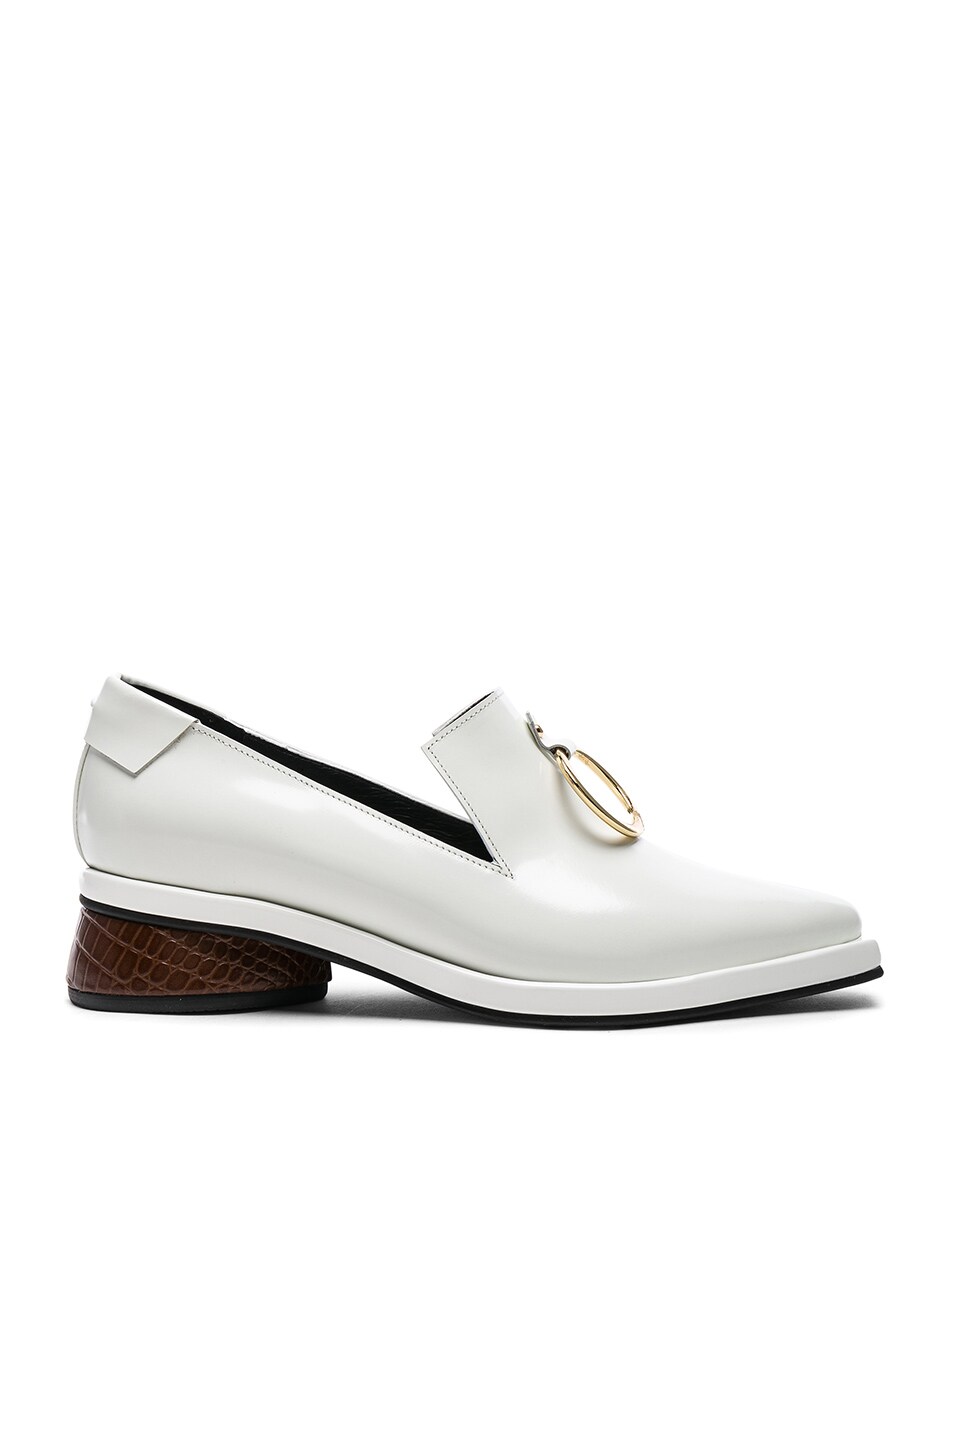 Image 1 of Reike Nen Leather Ring Square Loafers in White & Brown